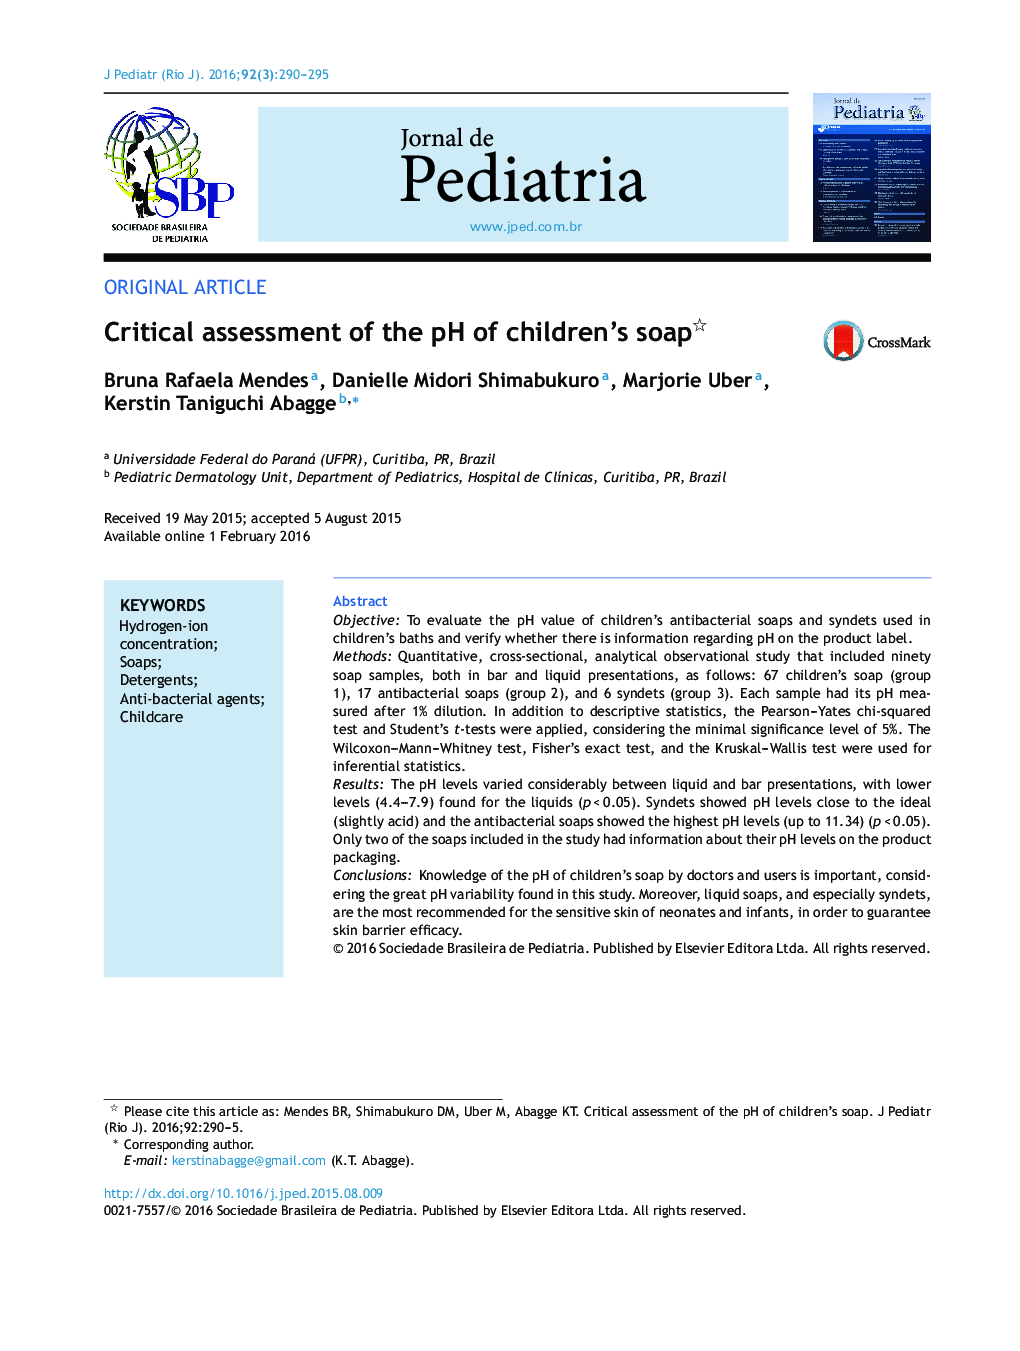 Critical assessment of the pH of children's soap 